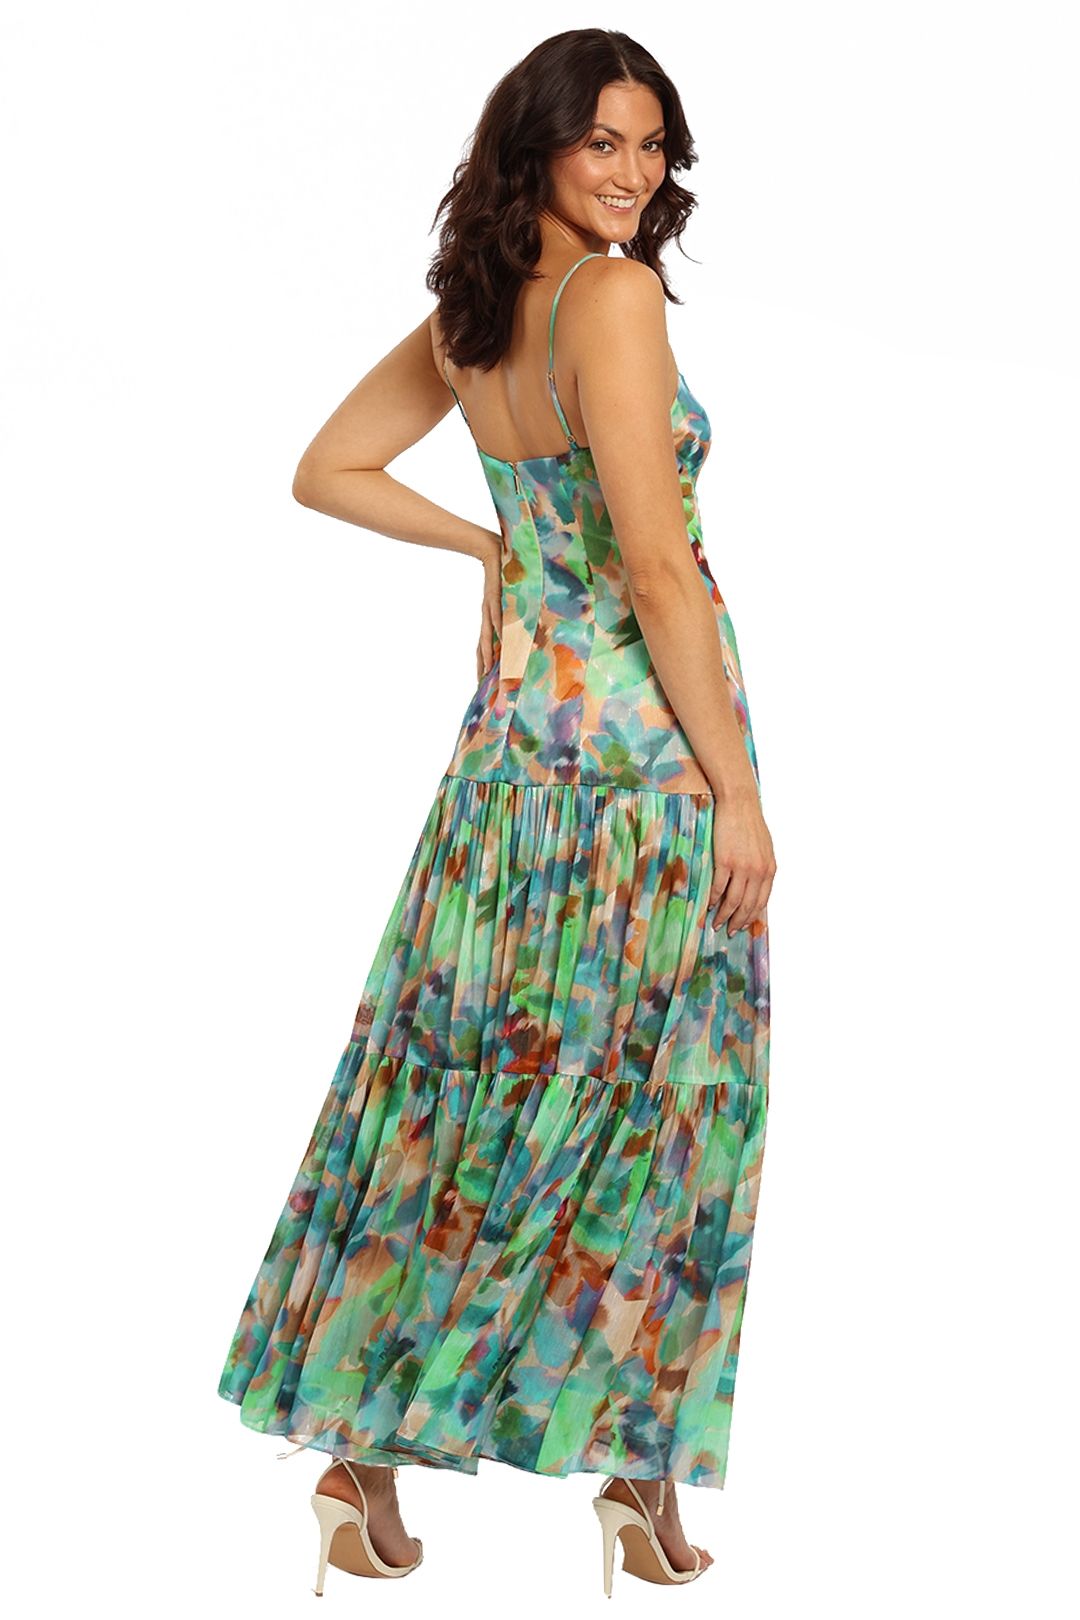 Ginger and Smart Beautiful Truth Sundress maxi